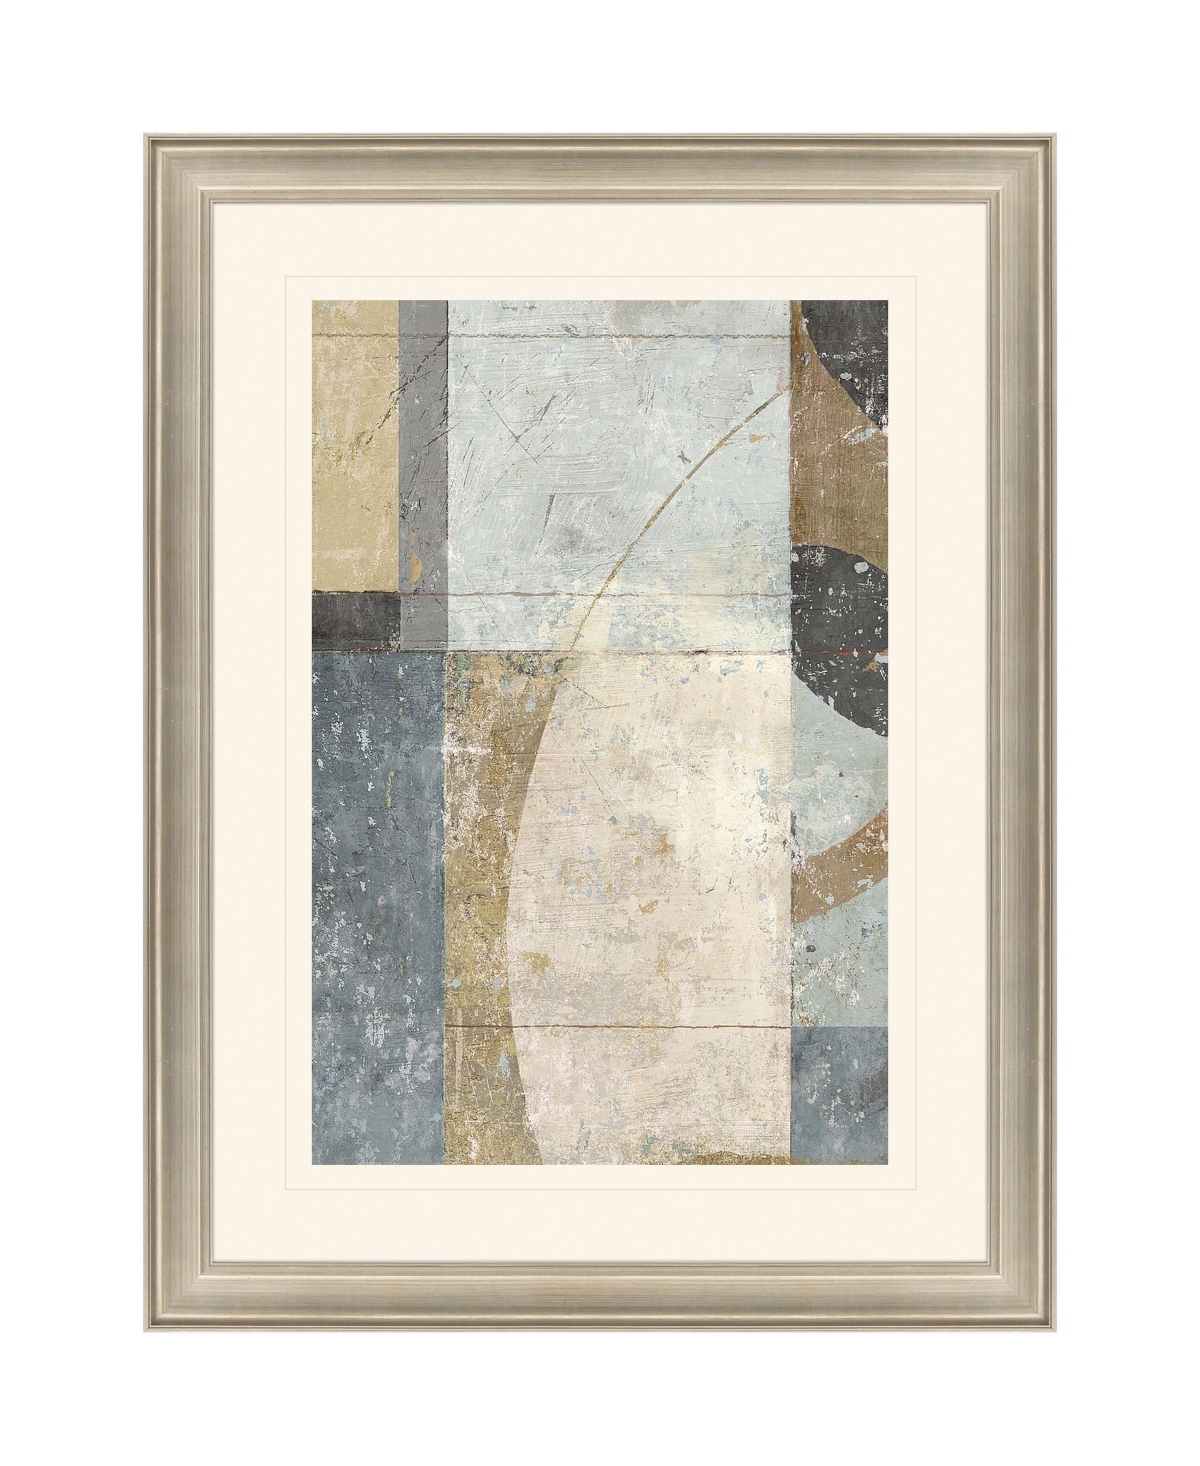 Paragon Picture Gallery Complementary Angles I Framed Art In Beige